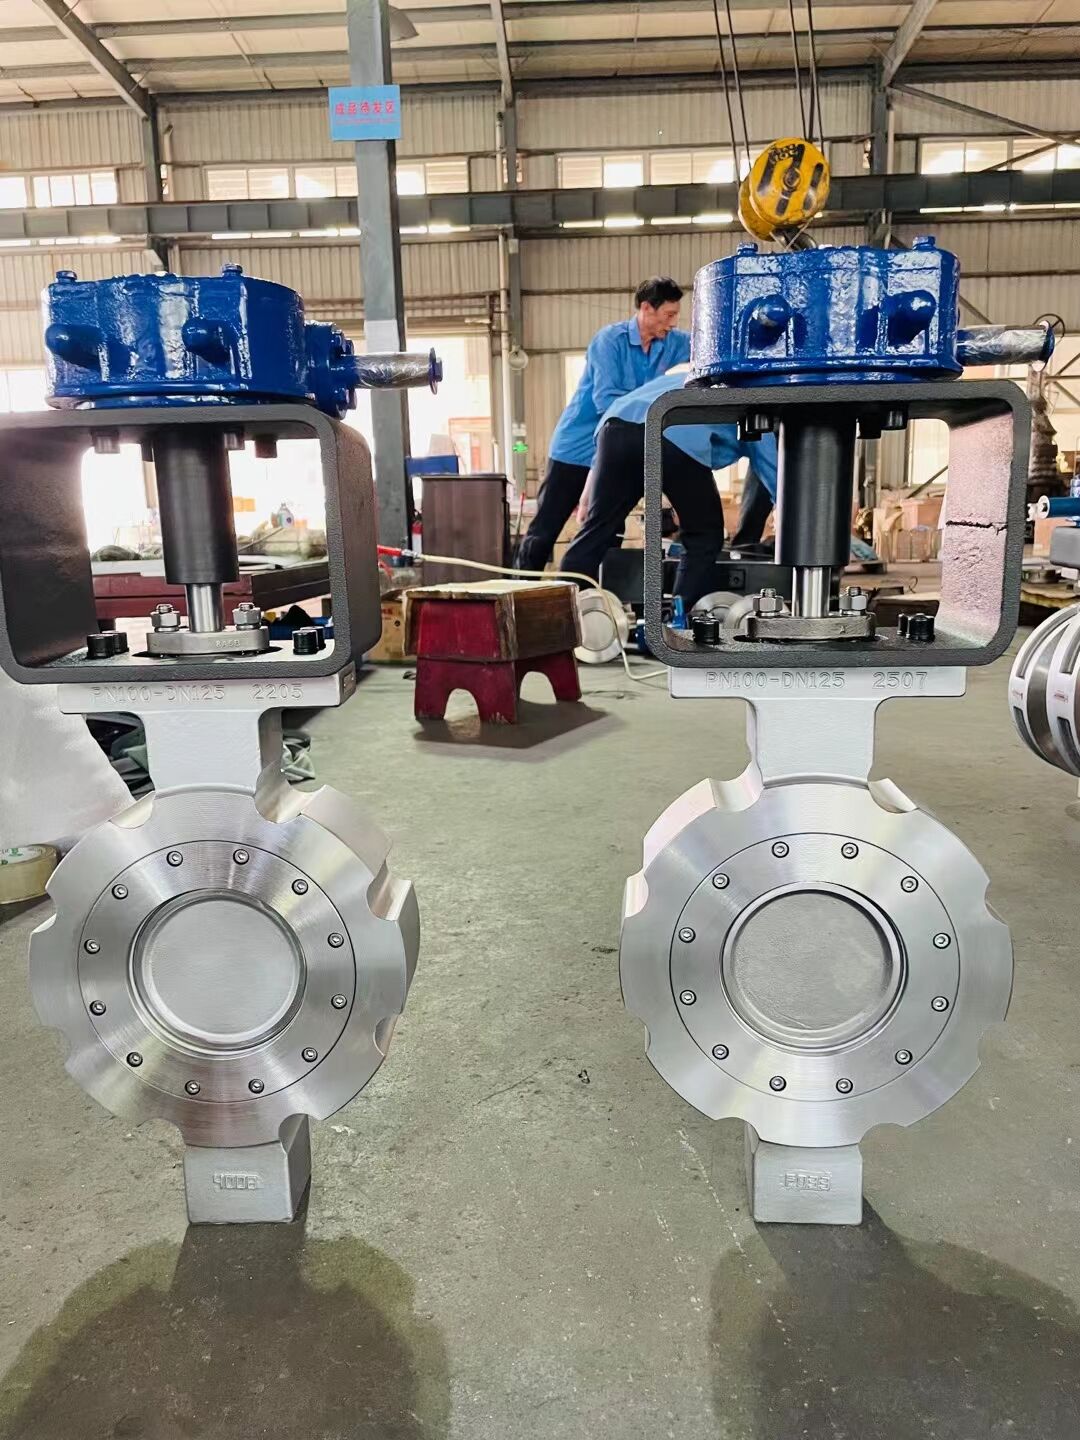 News - The production for Double eccentric butterfly valve